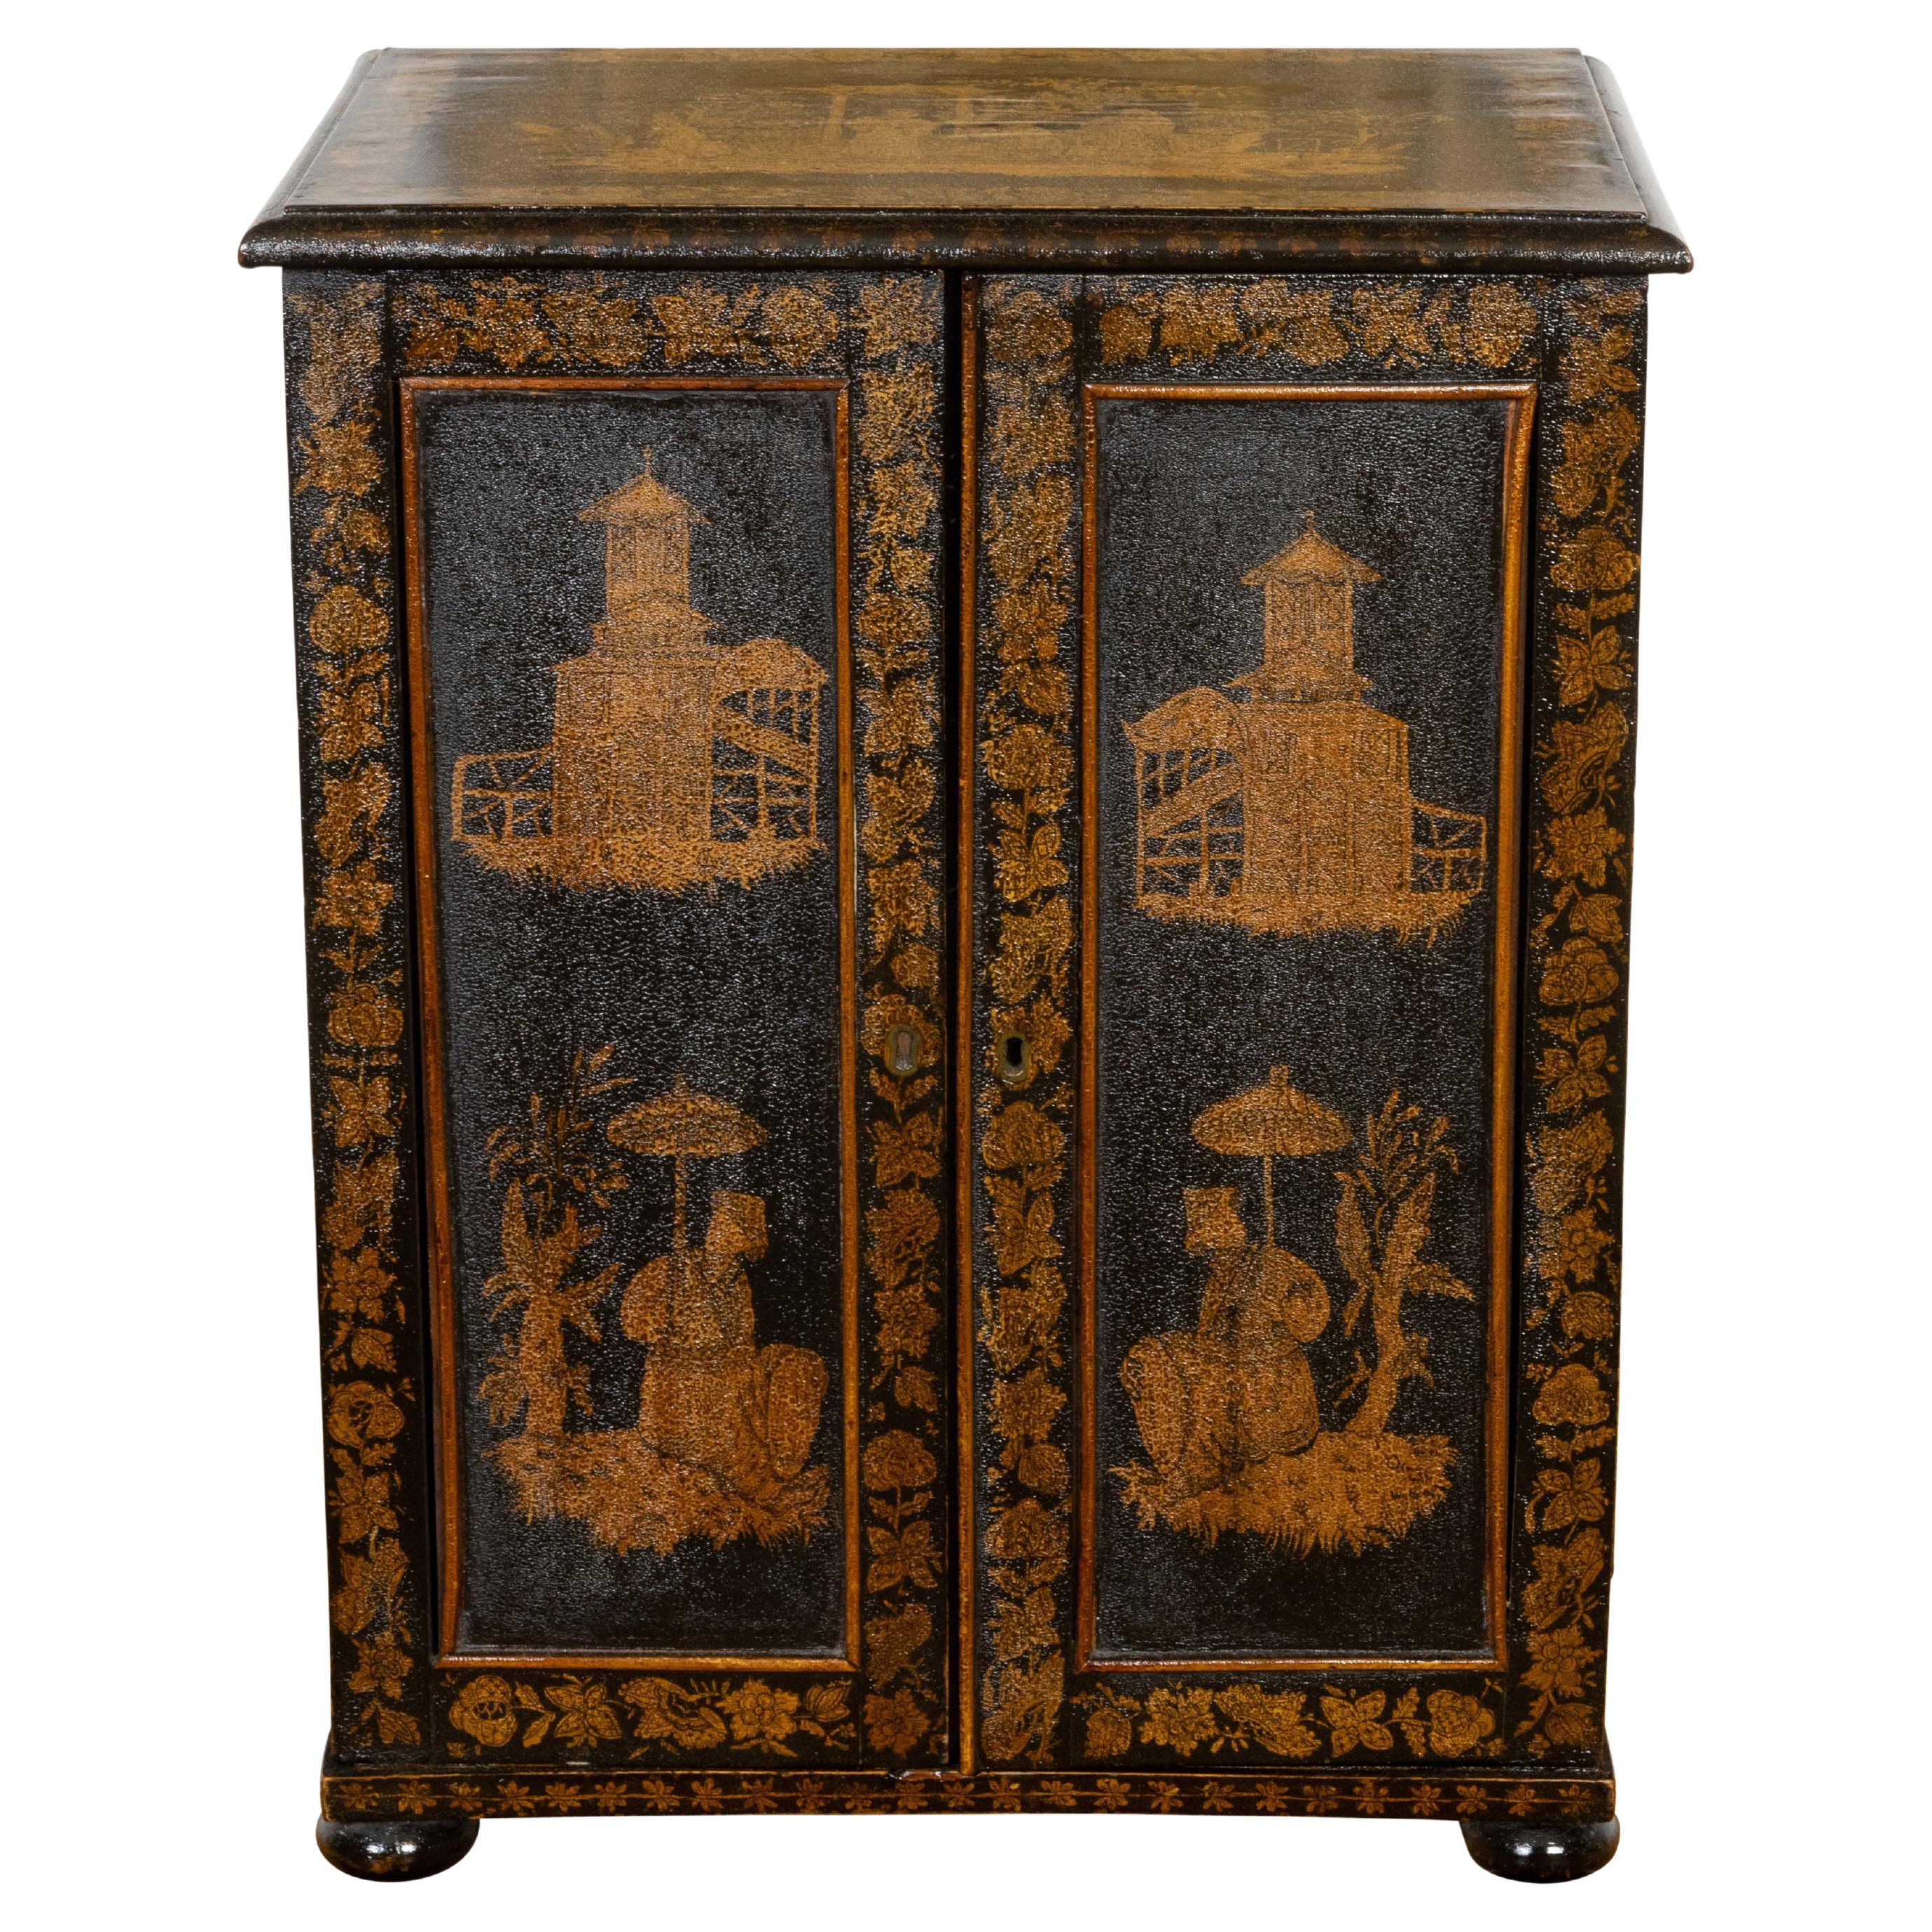 English 19th Century Black and Gold Chinoiserie Cabinet with Seven Drawers For Sale